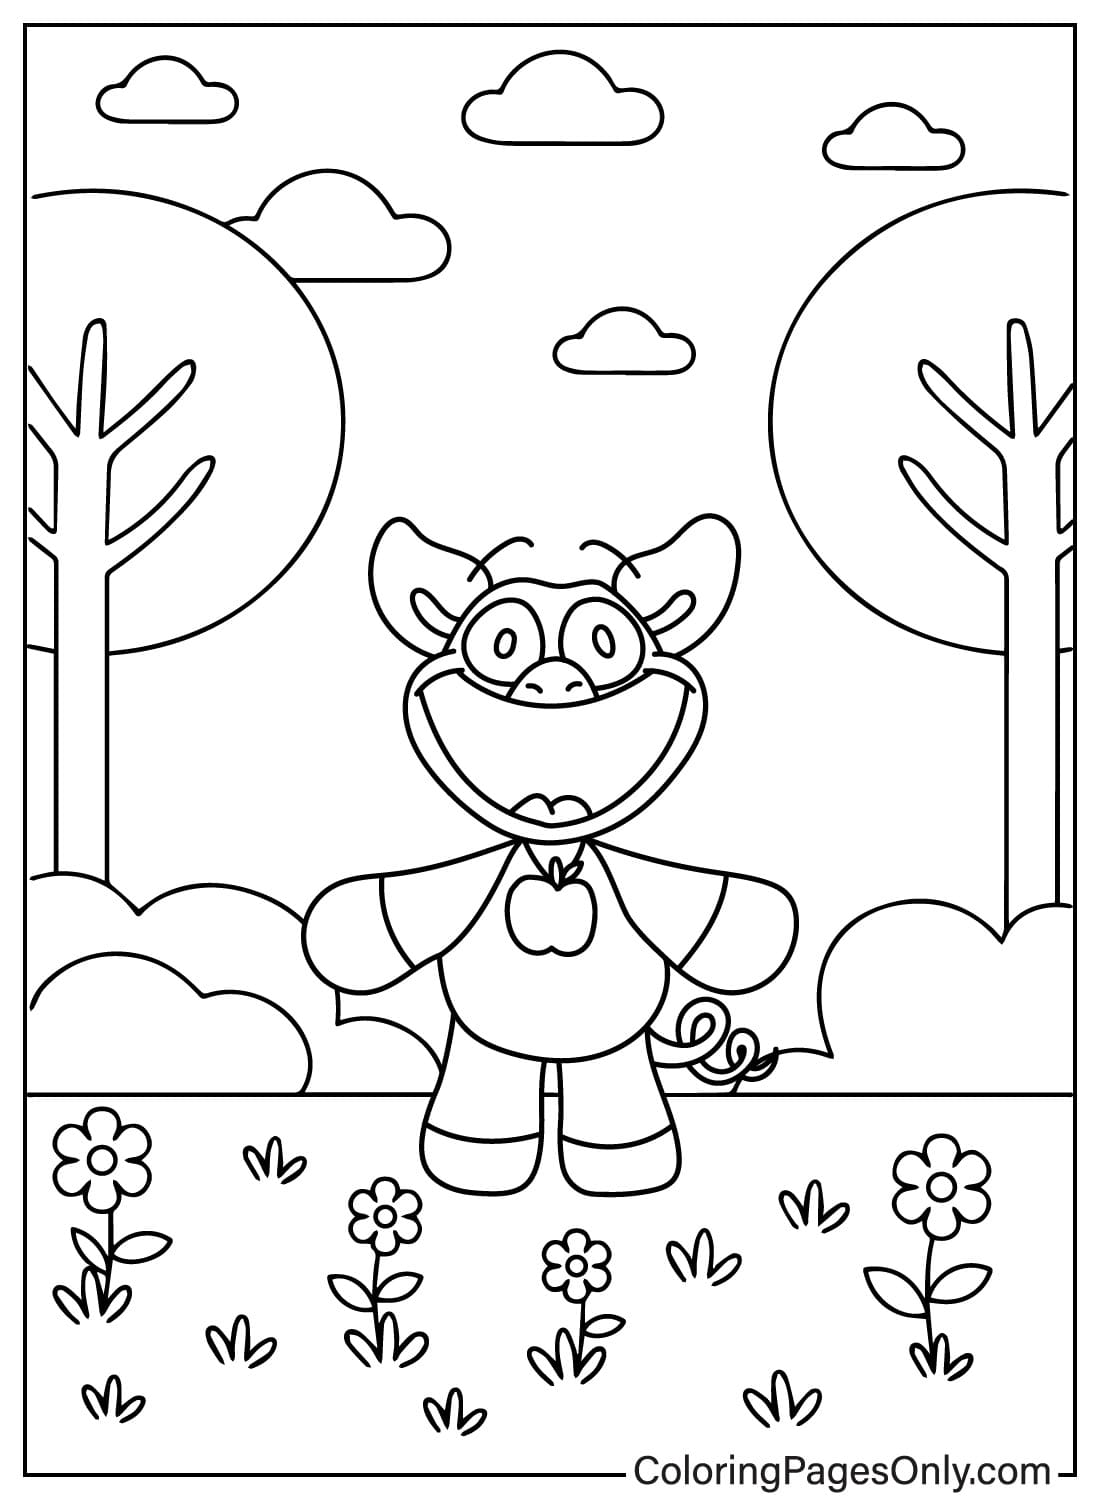 PickyPiggy Coloring Page in the Flower Garden from PickyPiggy